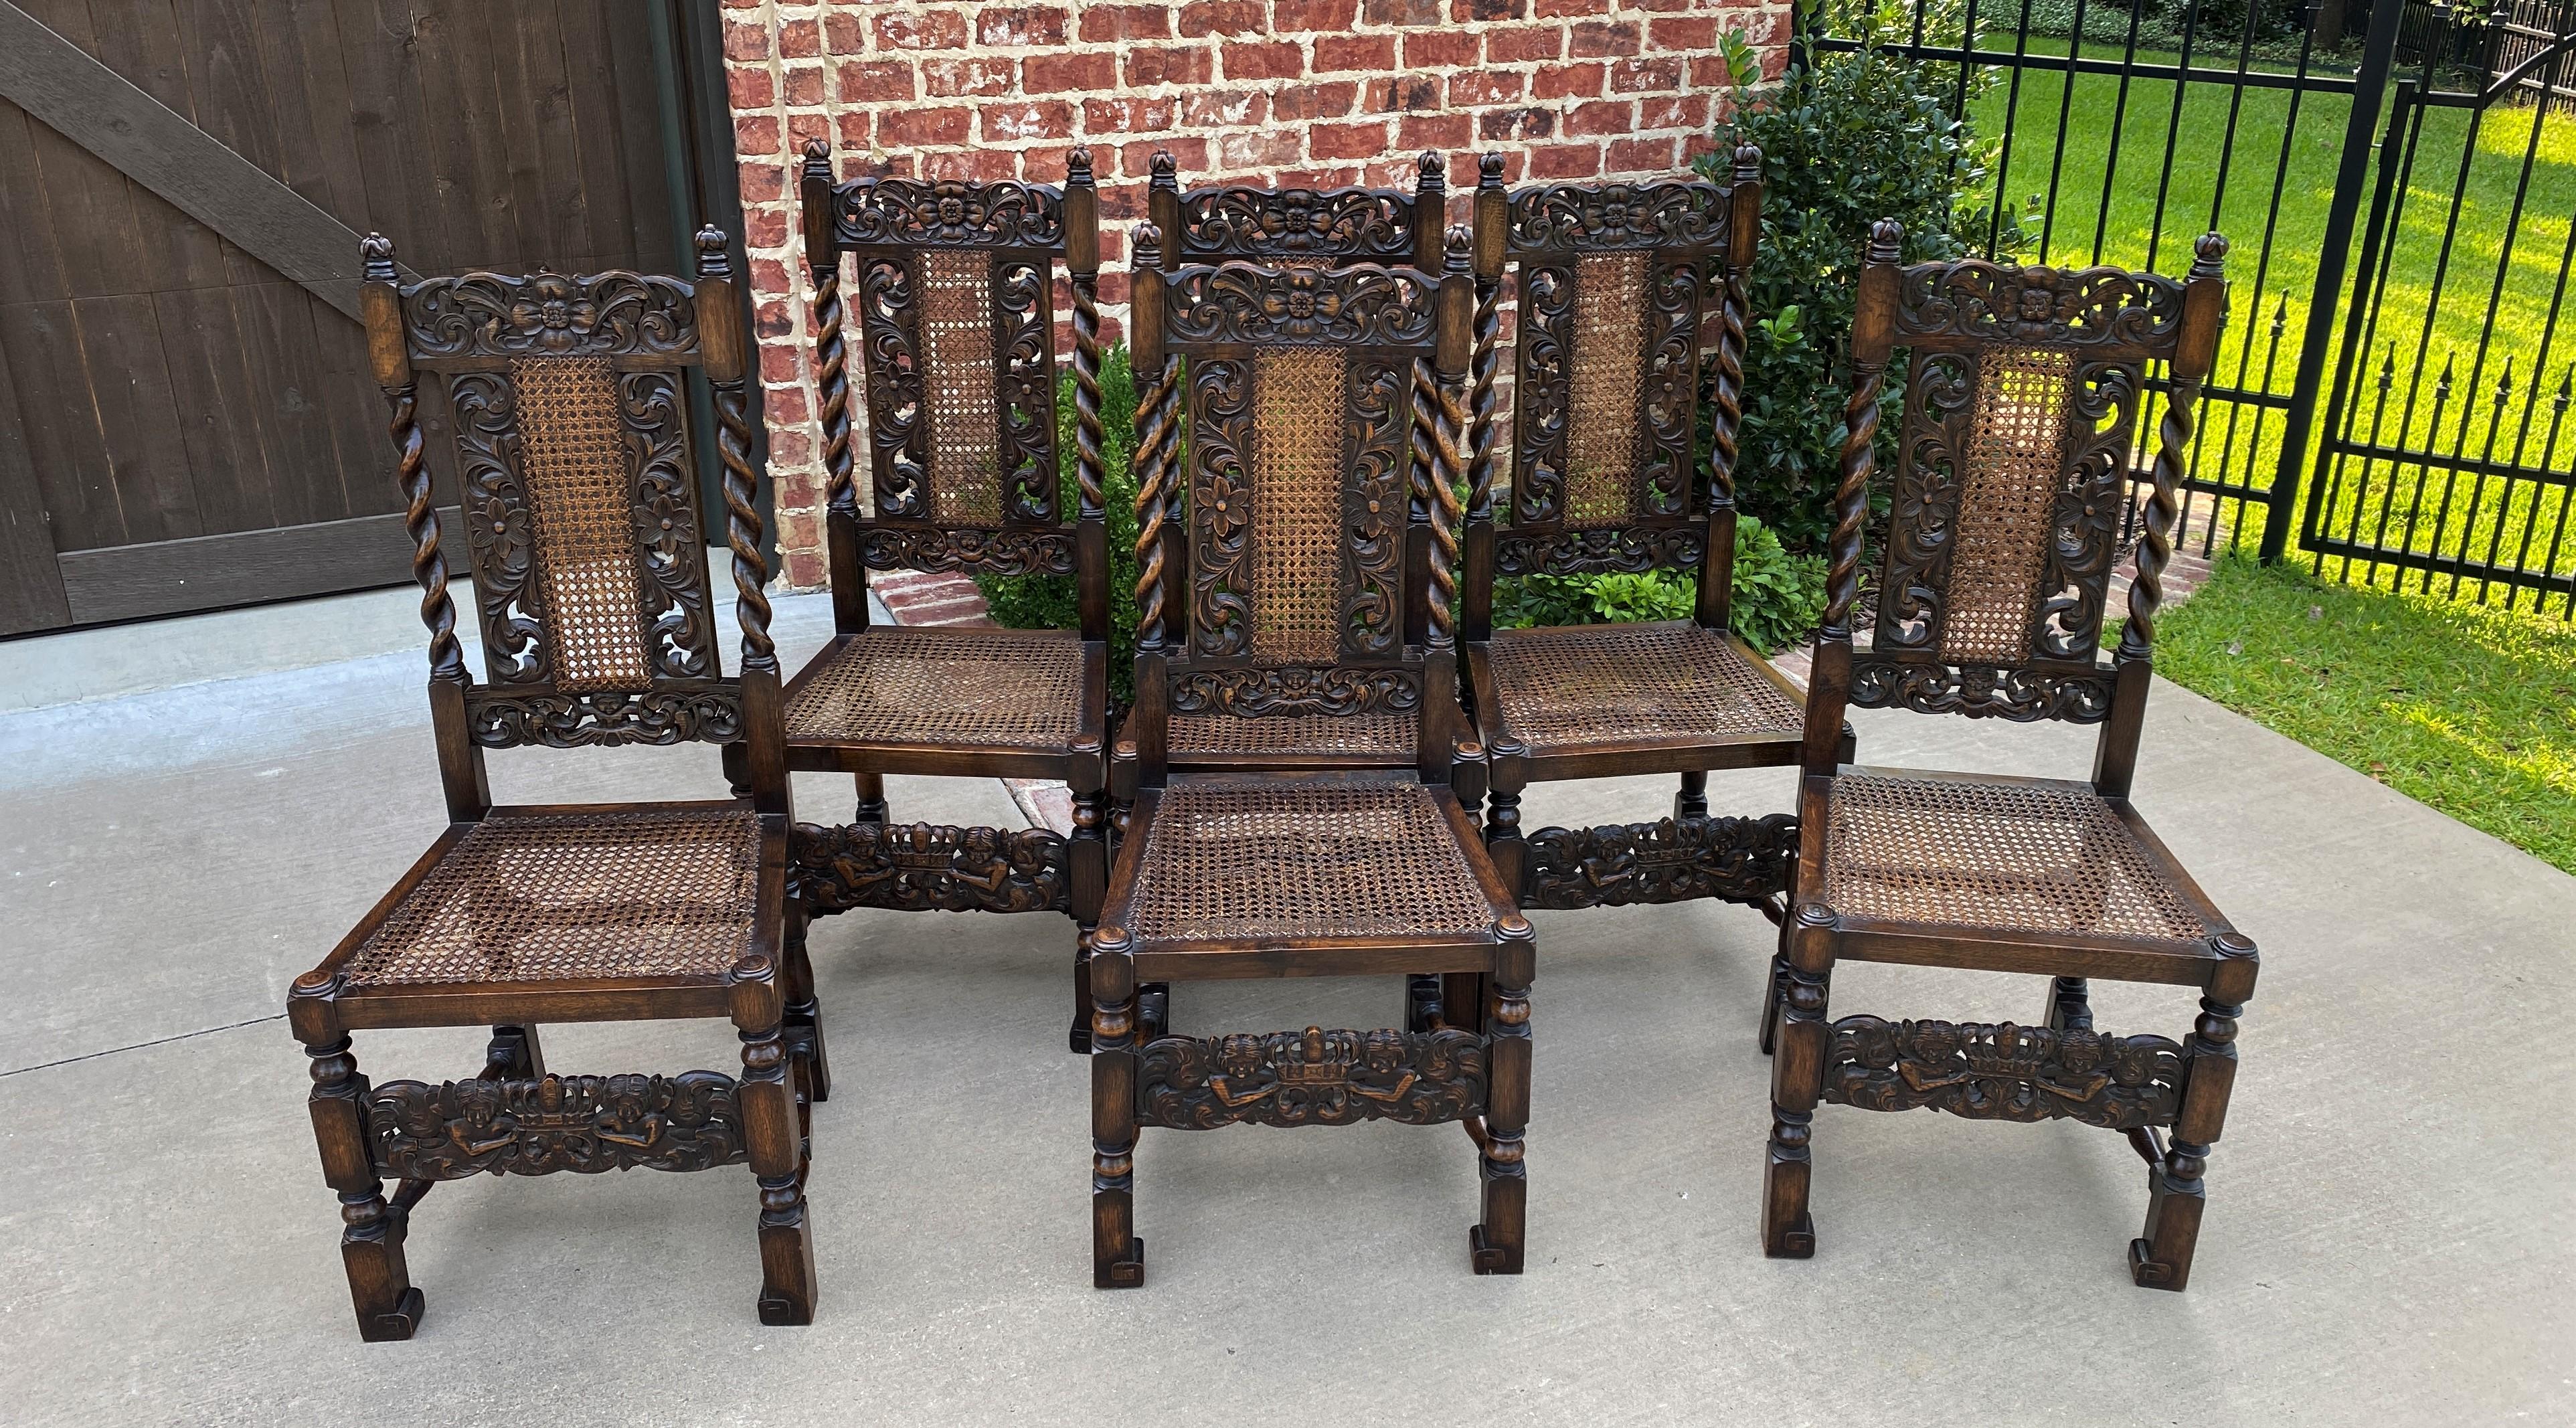 Antique English Chairs Set of 8 Barley Twist Caned Oak Dining Chairs Seating 7